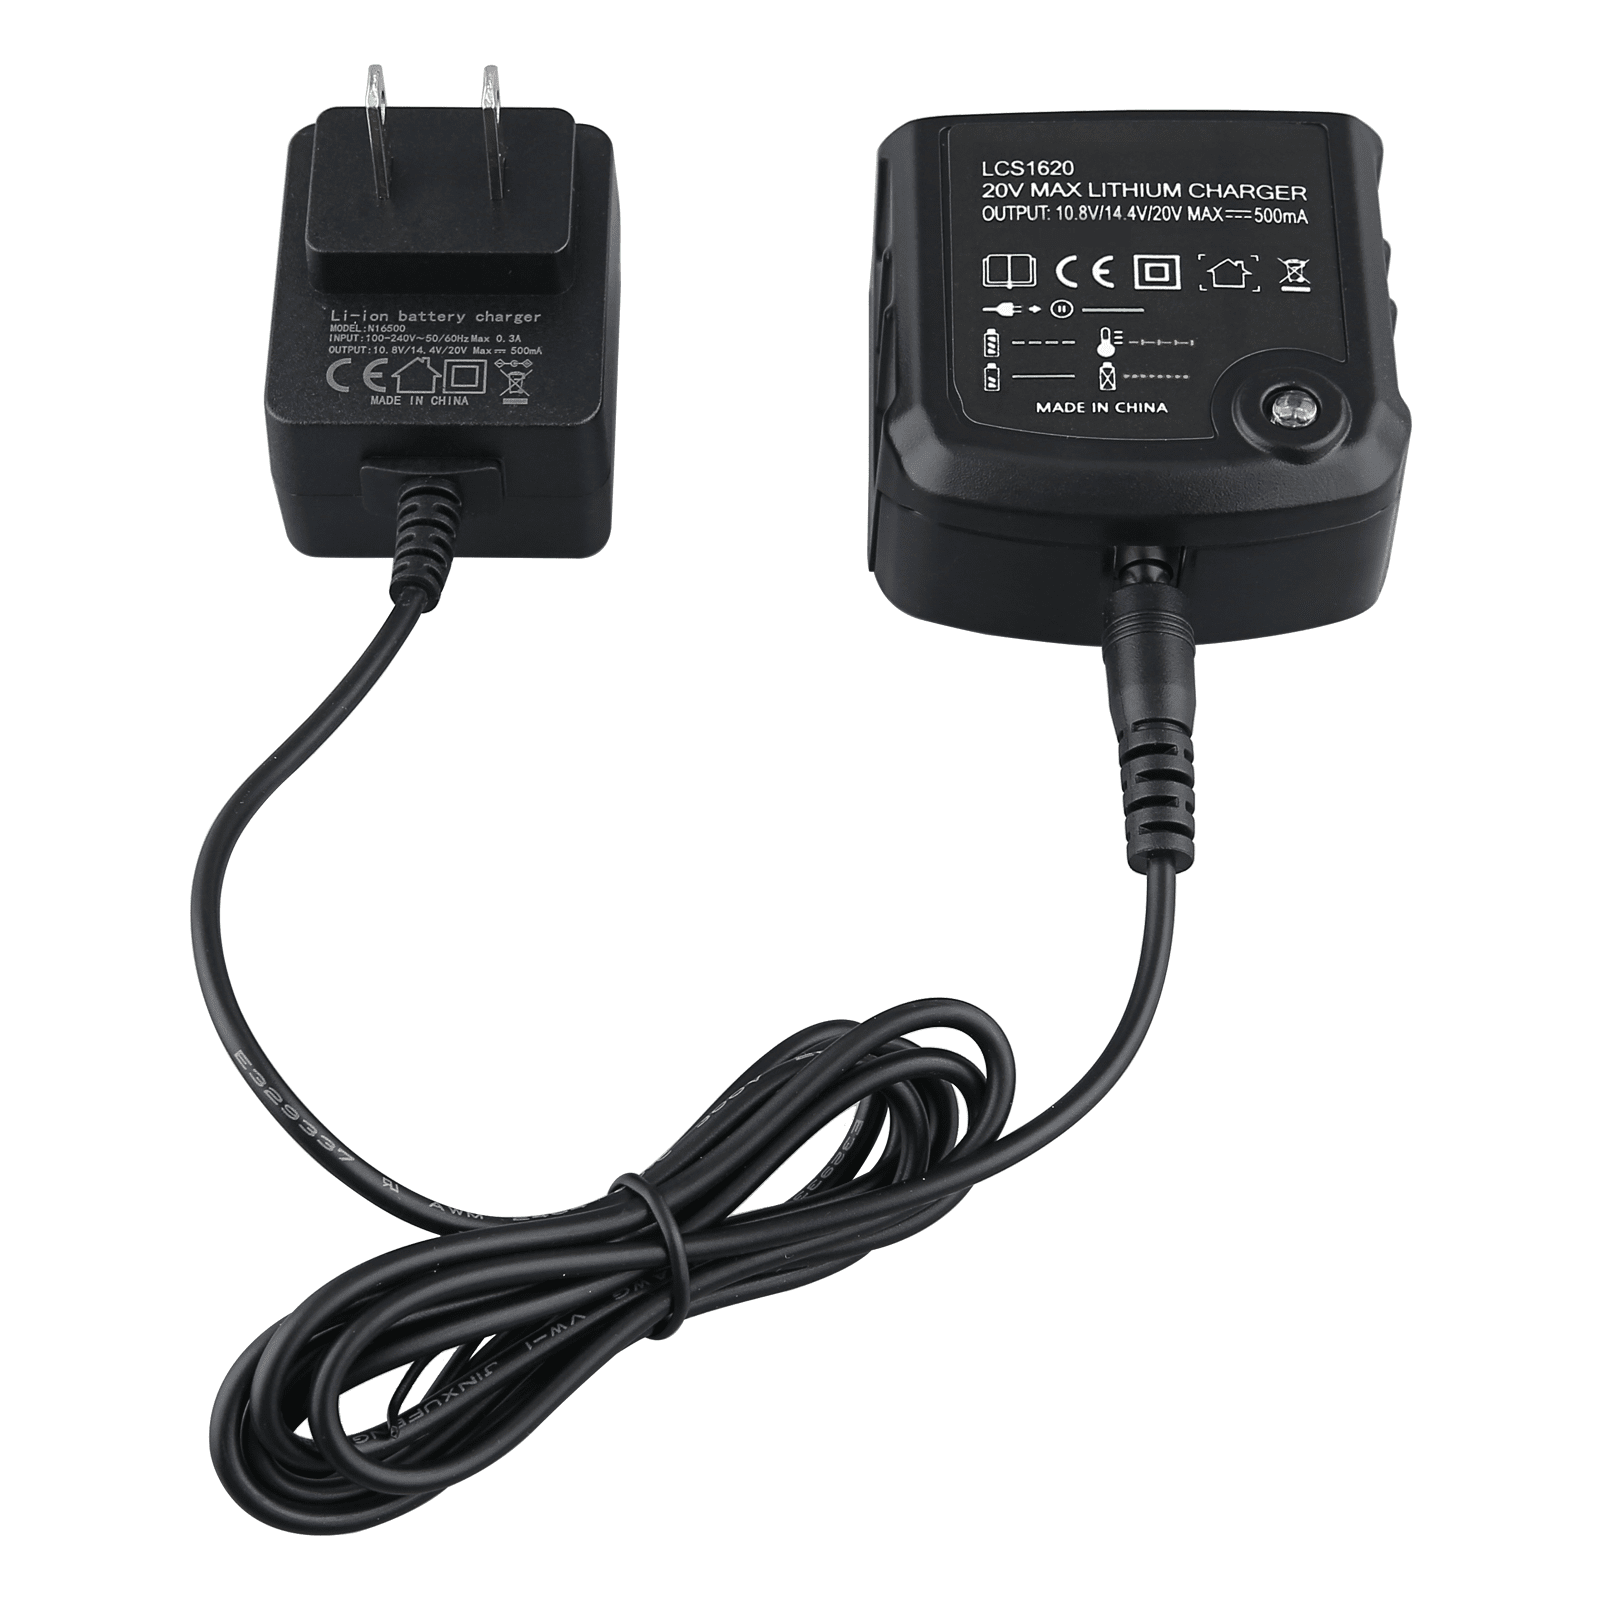 Replacement Battery Charger for LCS1620 Black Decker 12V-18V Lithium B